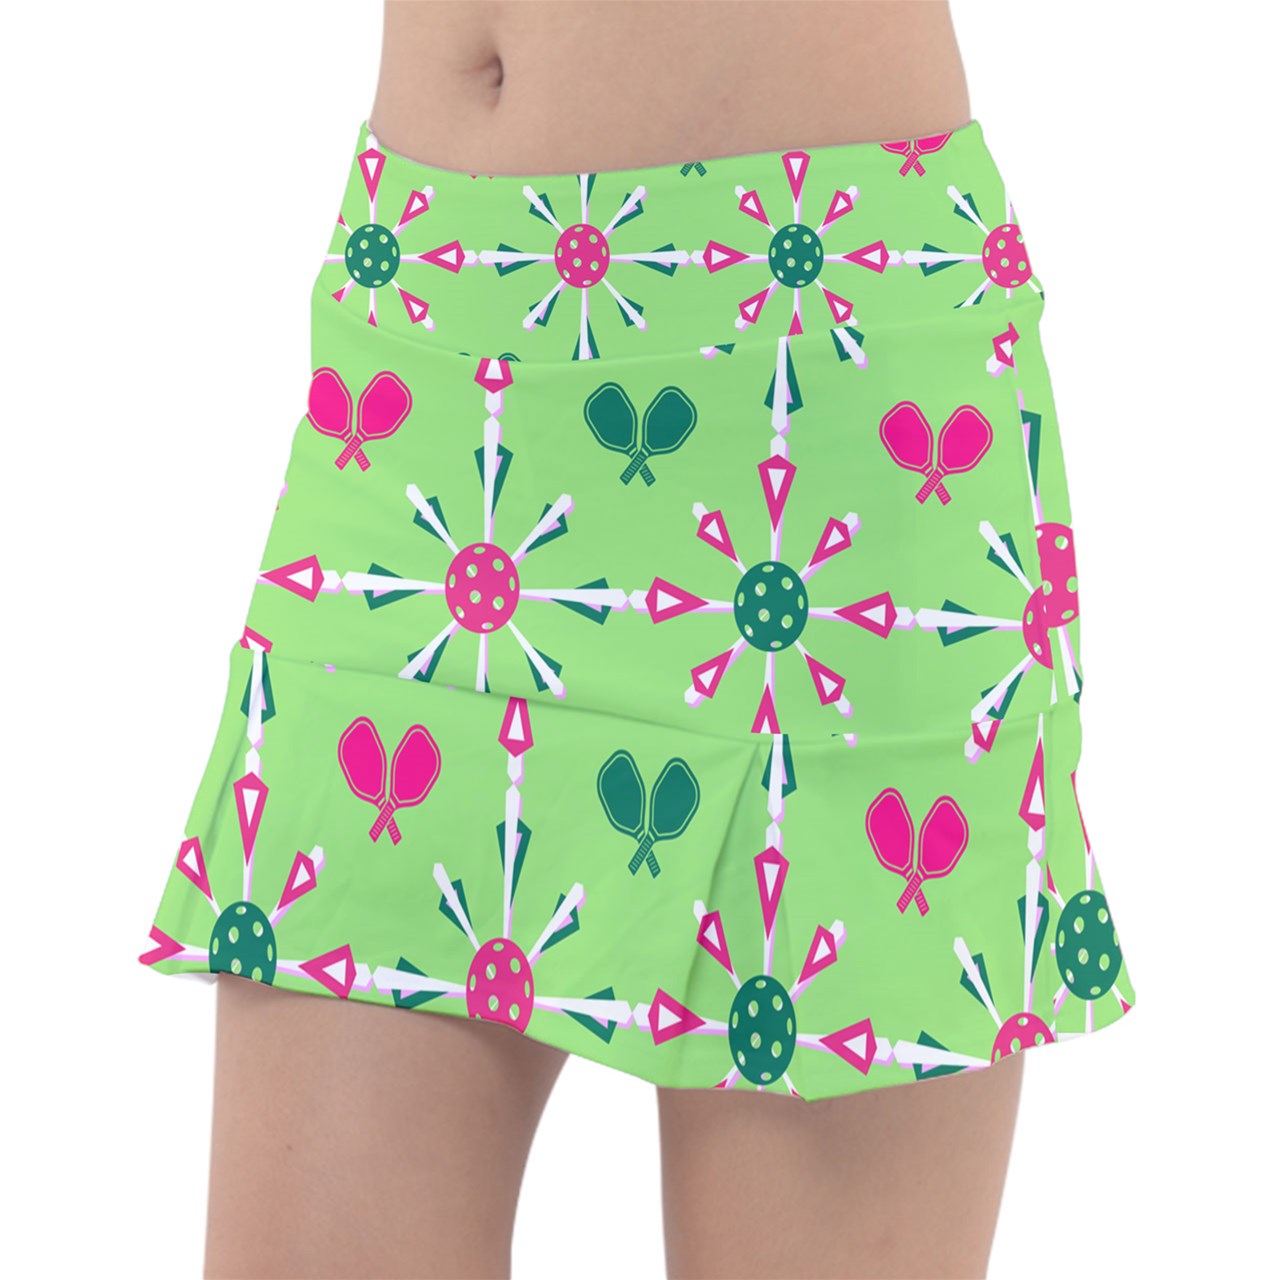 Penny - Pink/Green - Paddles - Classic Pickleball Skort by Dizzy Pickle Classic Tennis Skirt